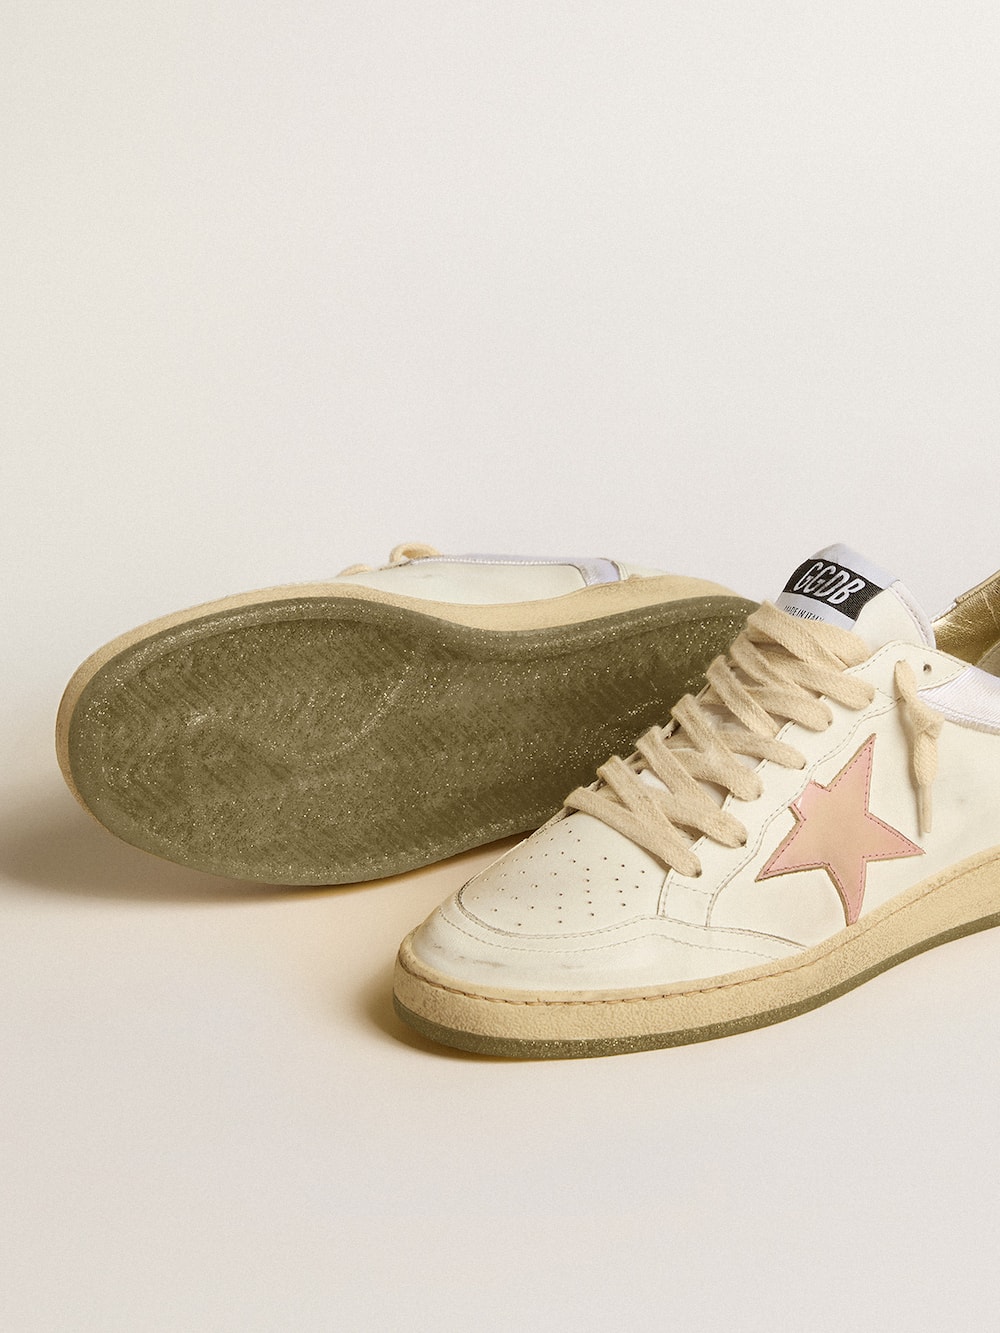 Golden Goose - Ball Star in nylon and leather with pink and light blue star and beige heel tab in 